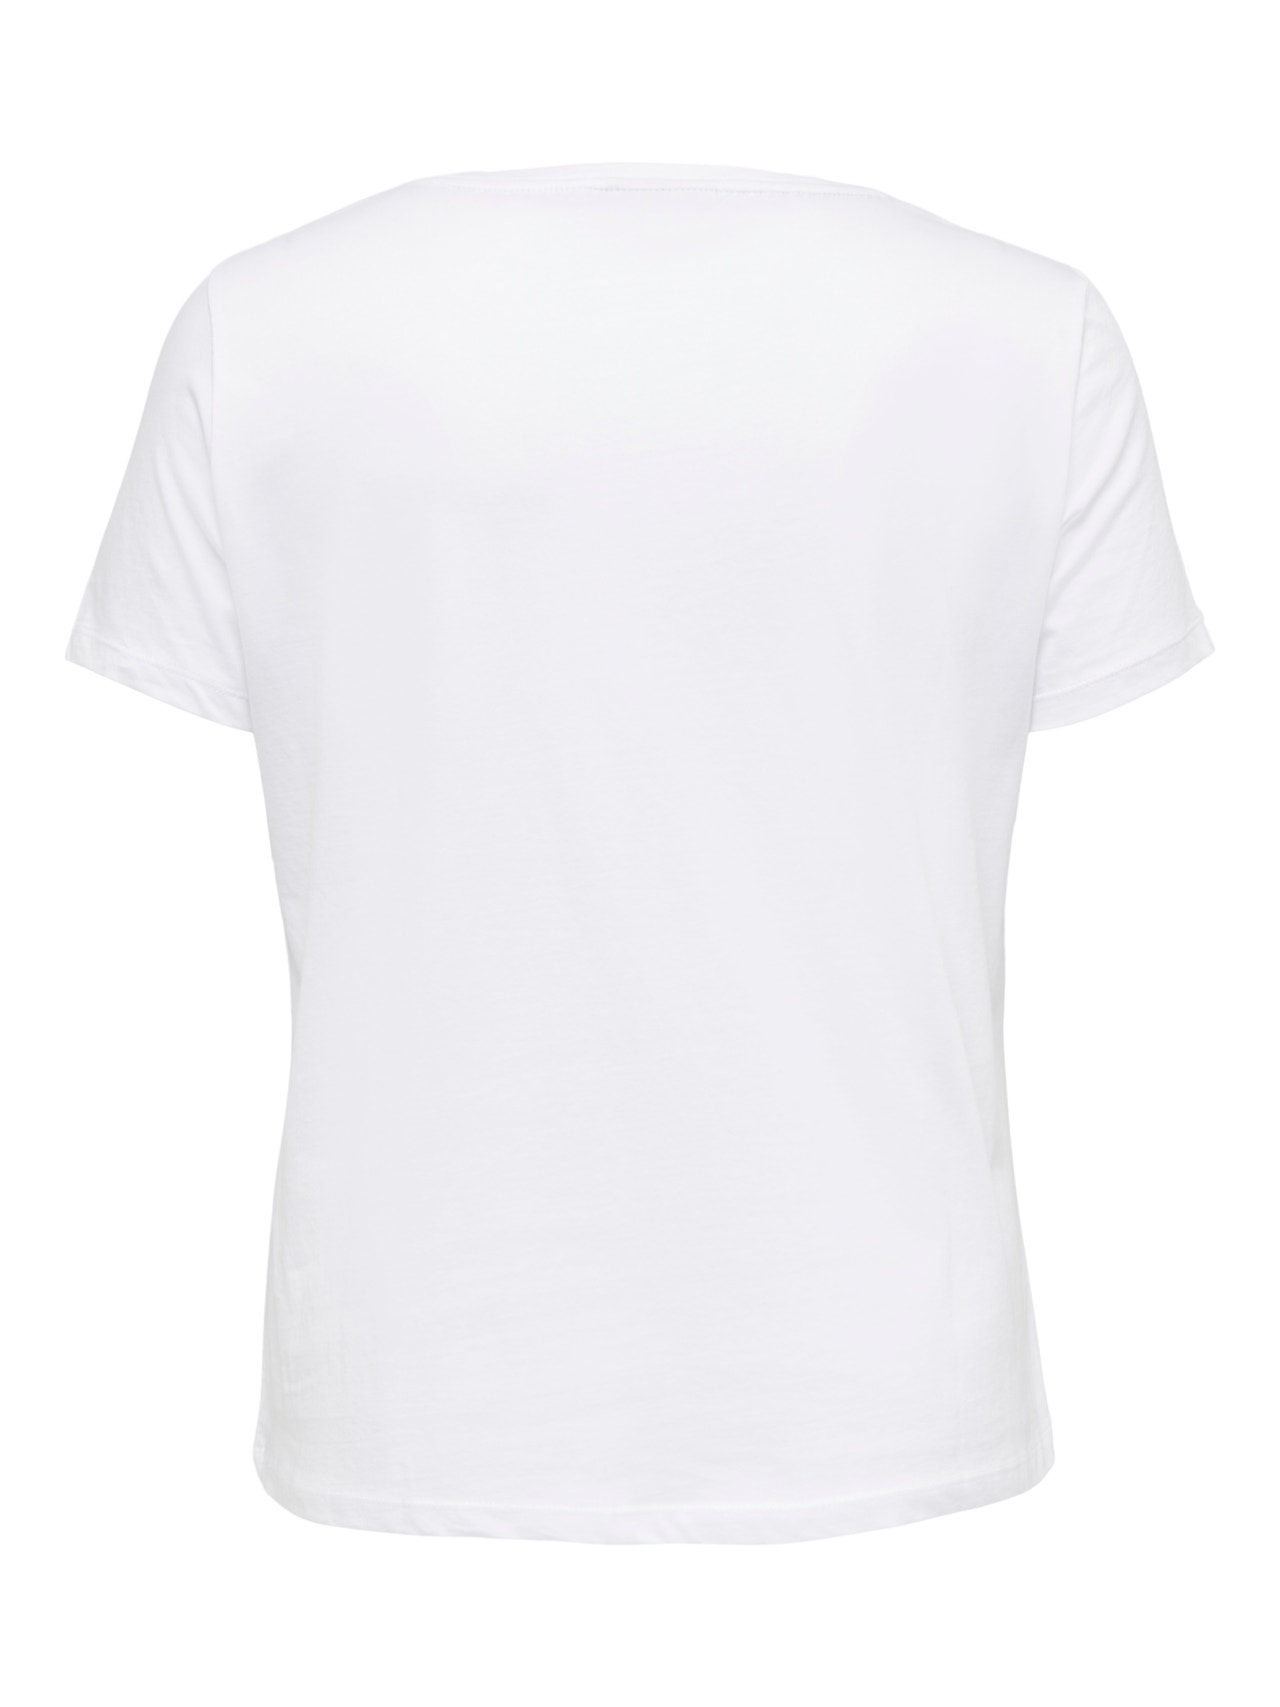 ONLY curvy o-neck t-shirt -Bright White - 15284785